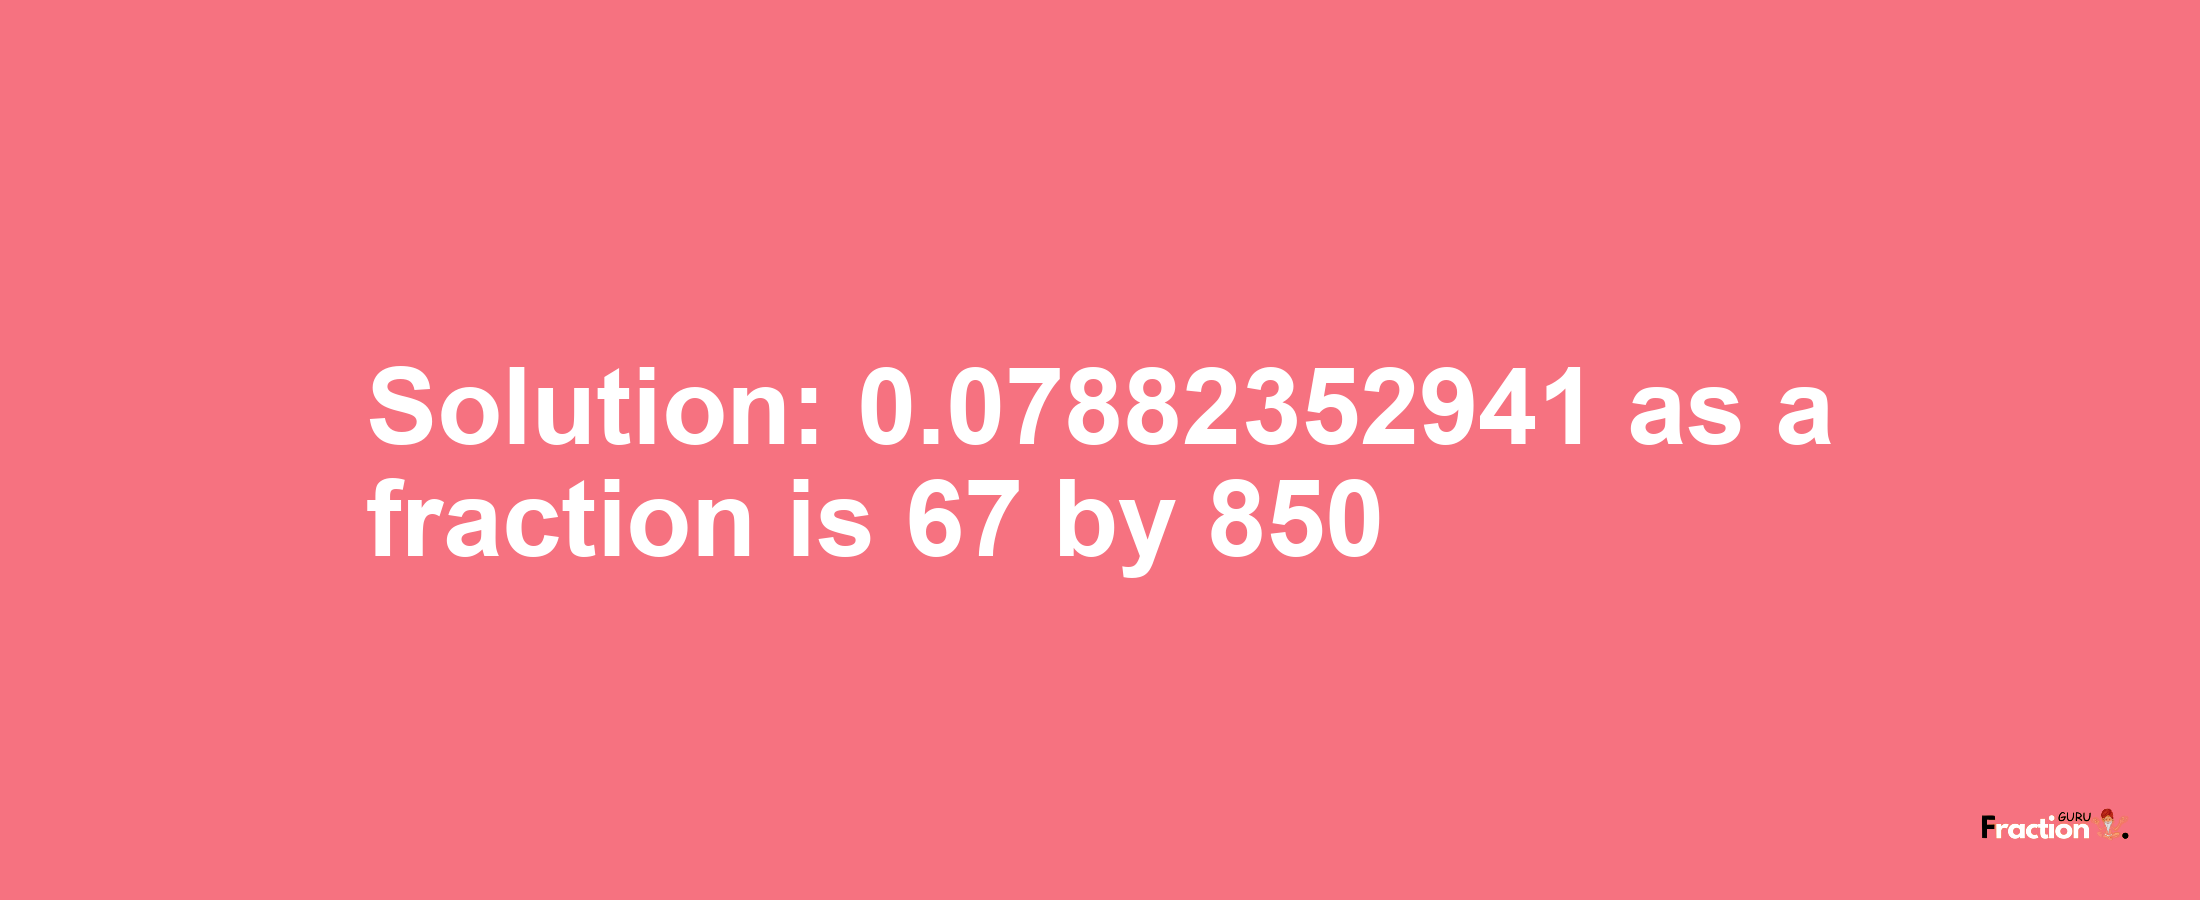 Solution:0.07882352941 as a fraction is 67/850